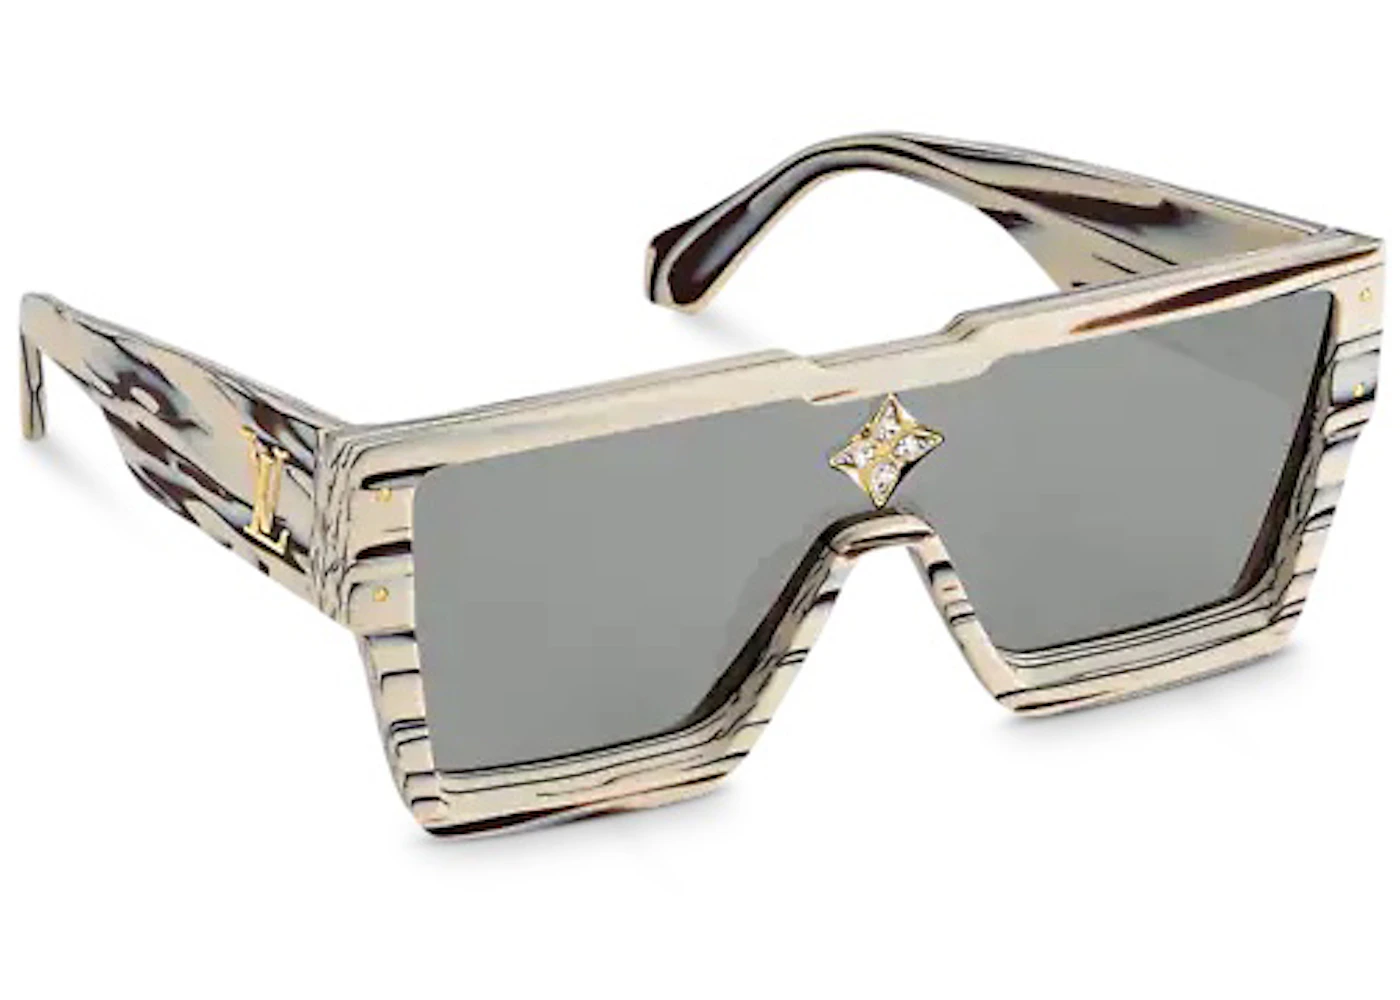 Louis Vuitton Cyclone Sunglasses, Clear, One Size